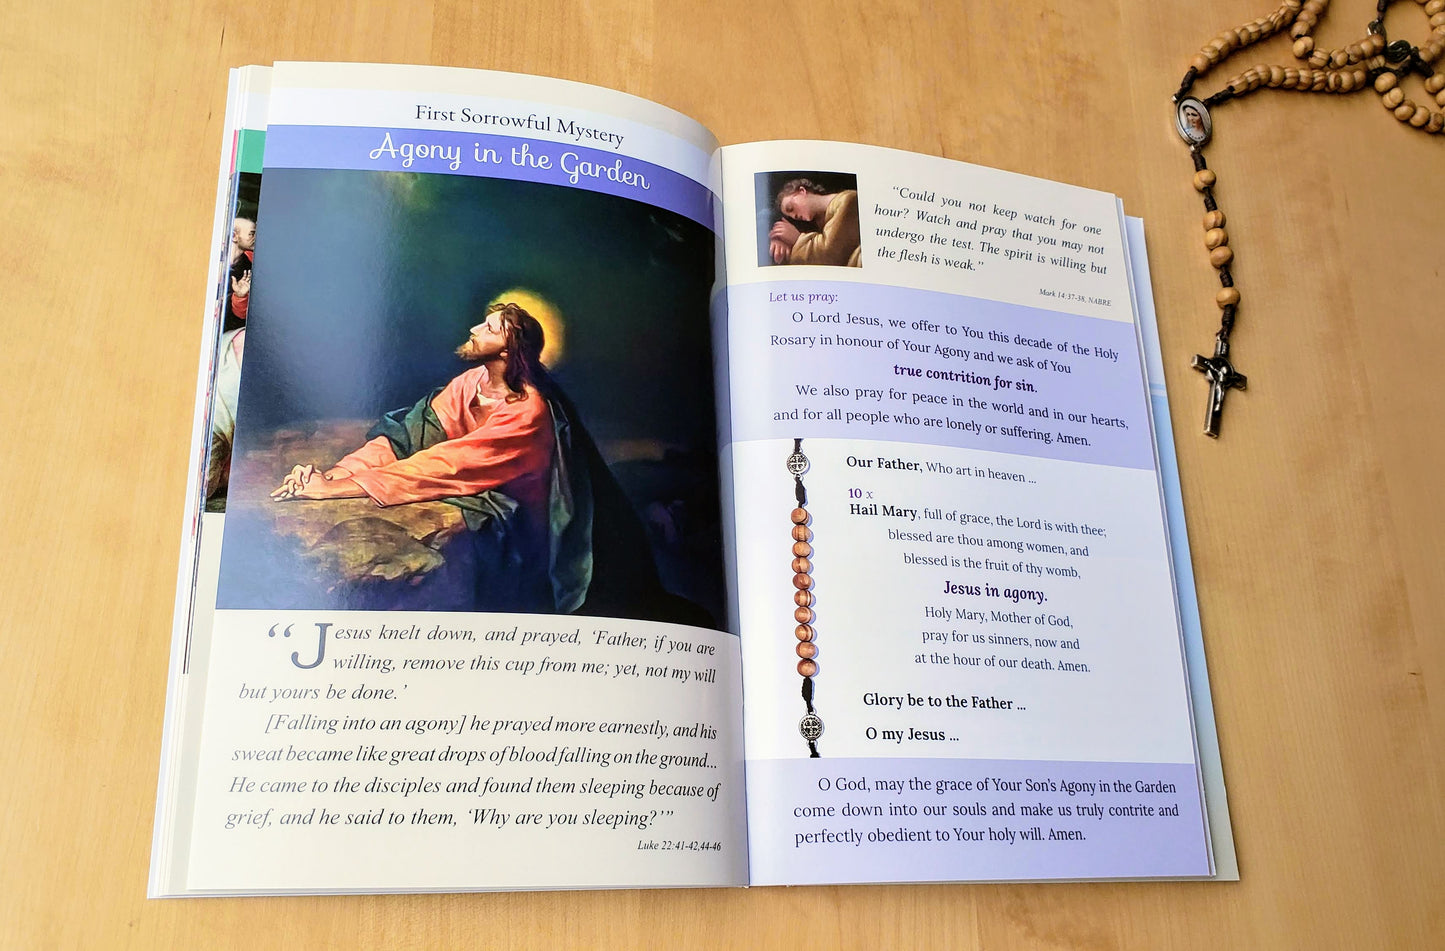 A Booklet to Pray the Rosary  -By Amy Law